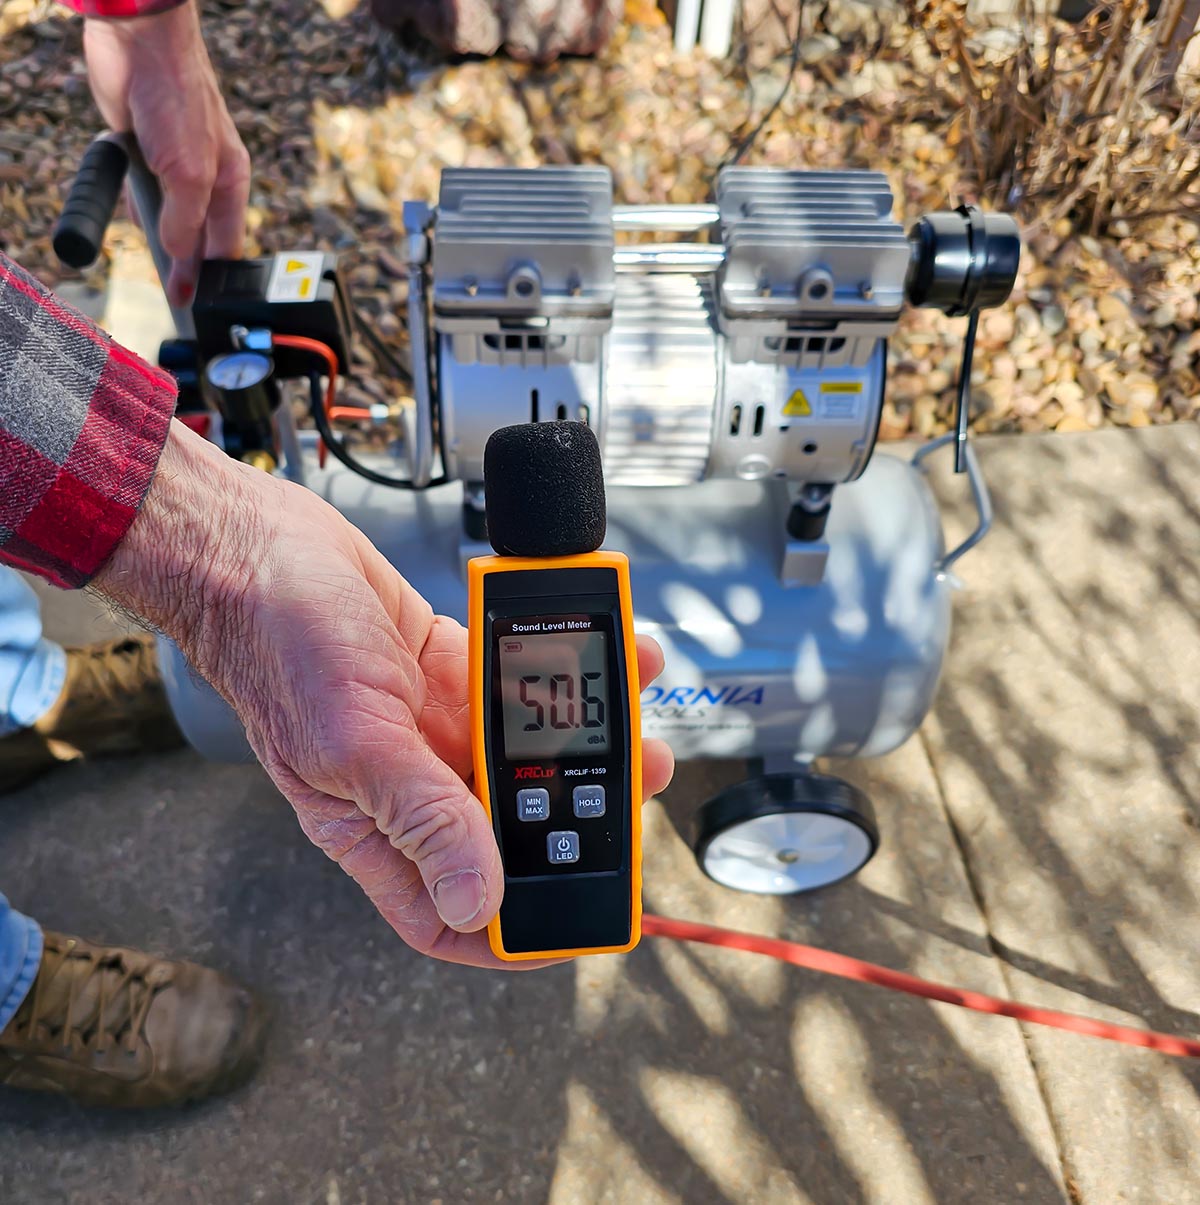 A person holding a decibel meter reading 50.6 next to the California Air Tools 8010 air compressor during testing.